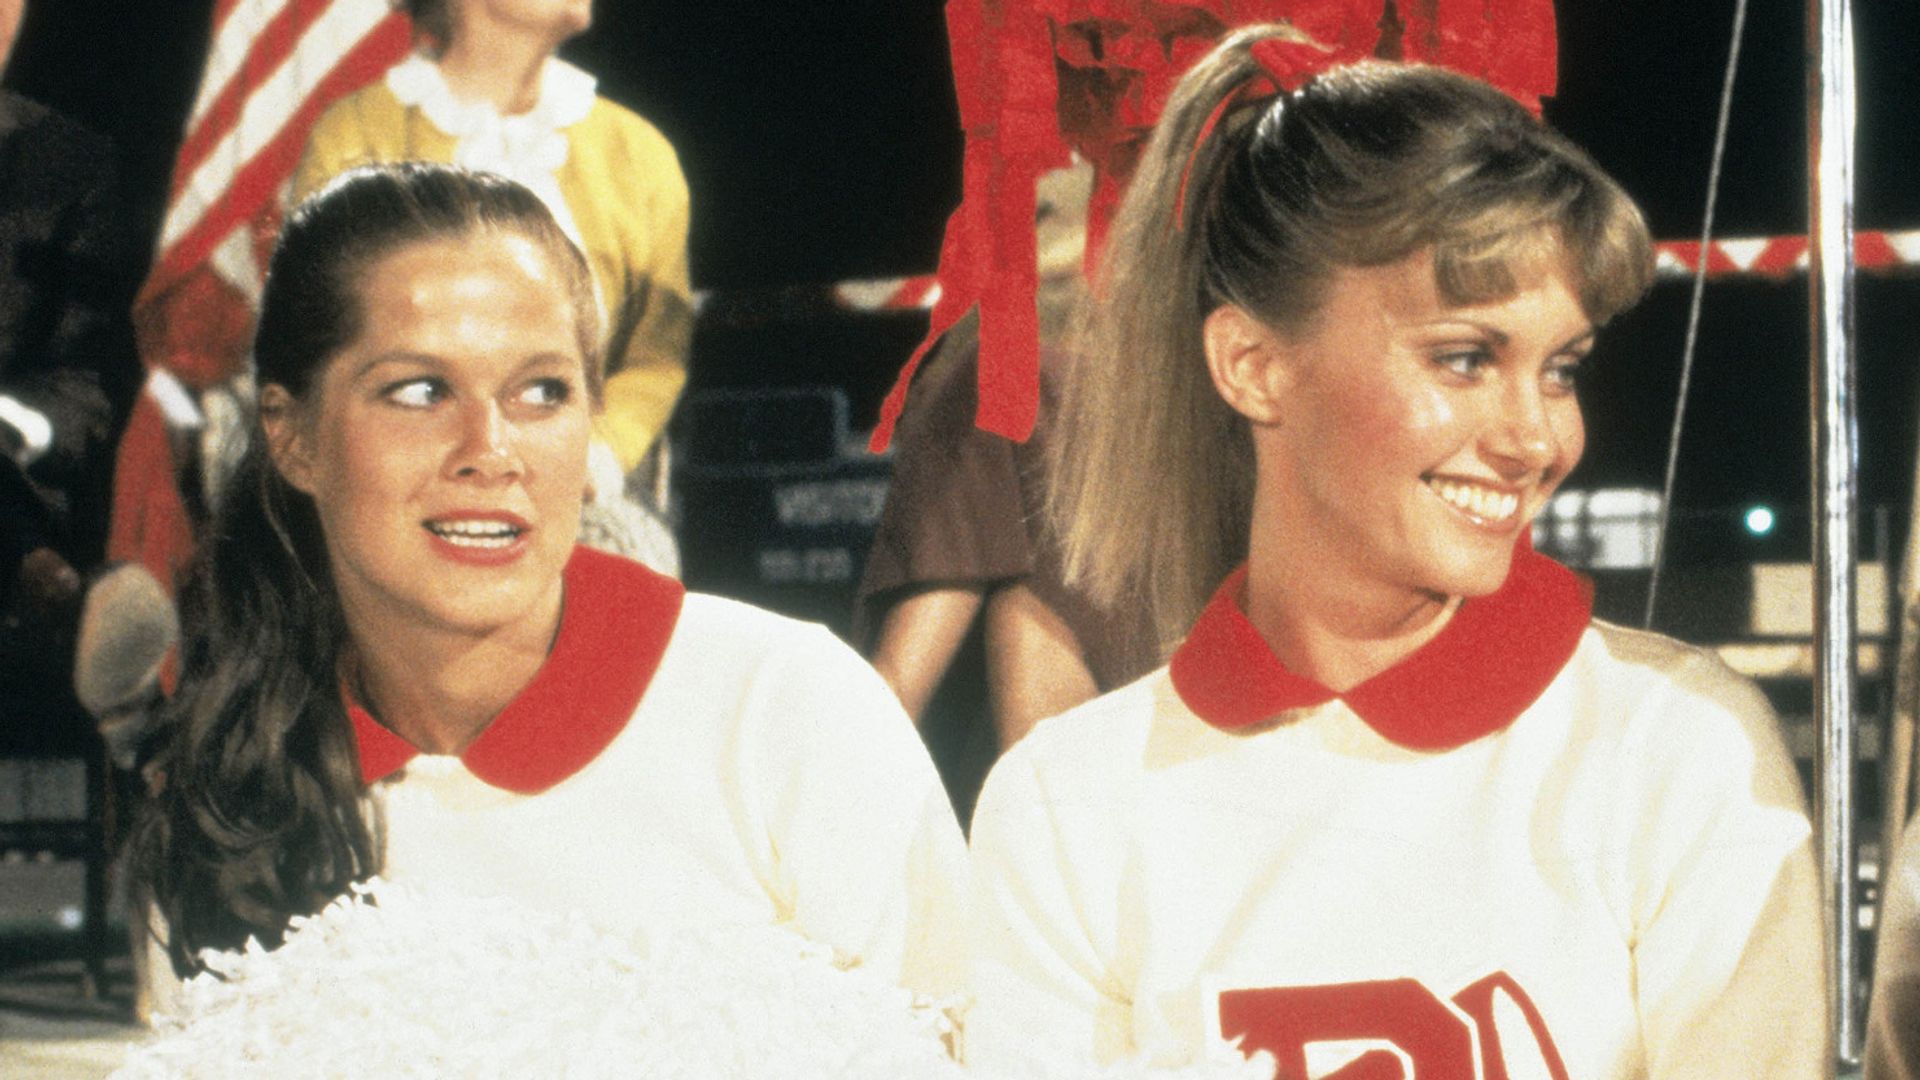 Grease star who played Patty Simcox dies